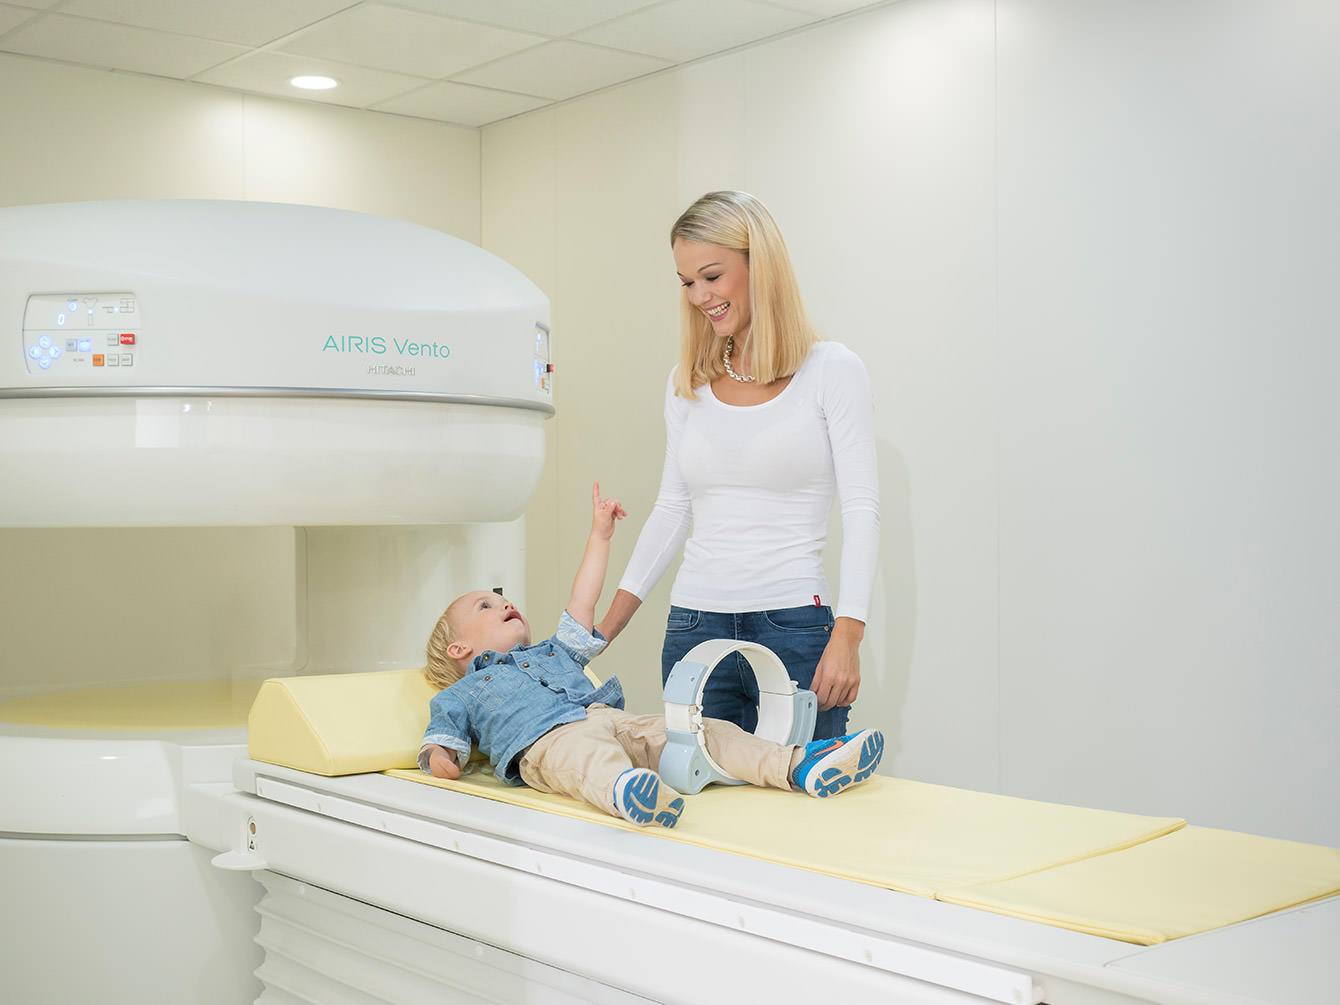 AIRIS Vento by Hitachi with young patient and mother